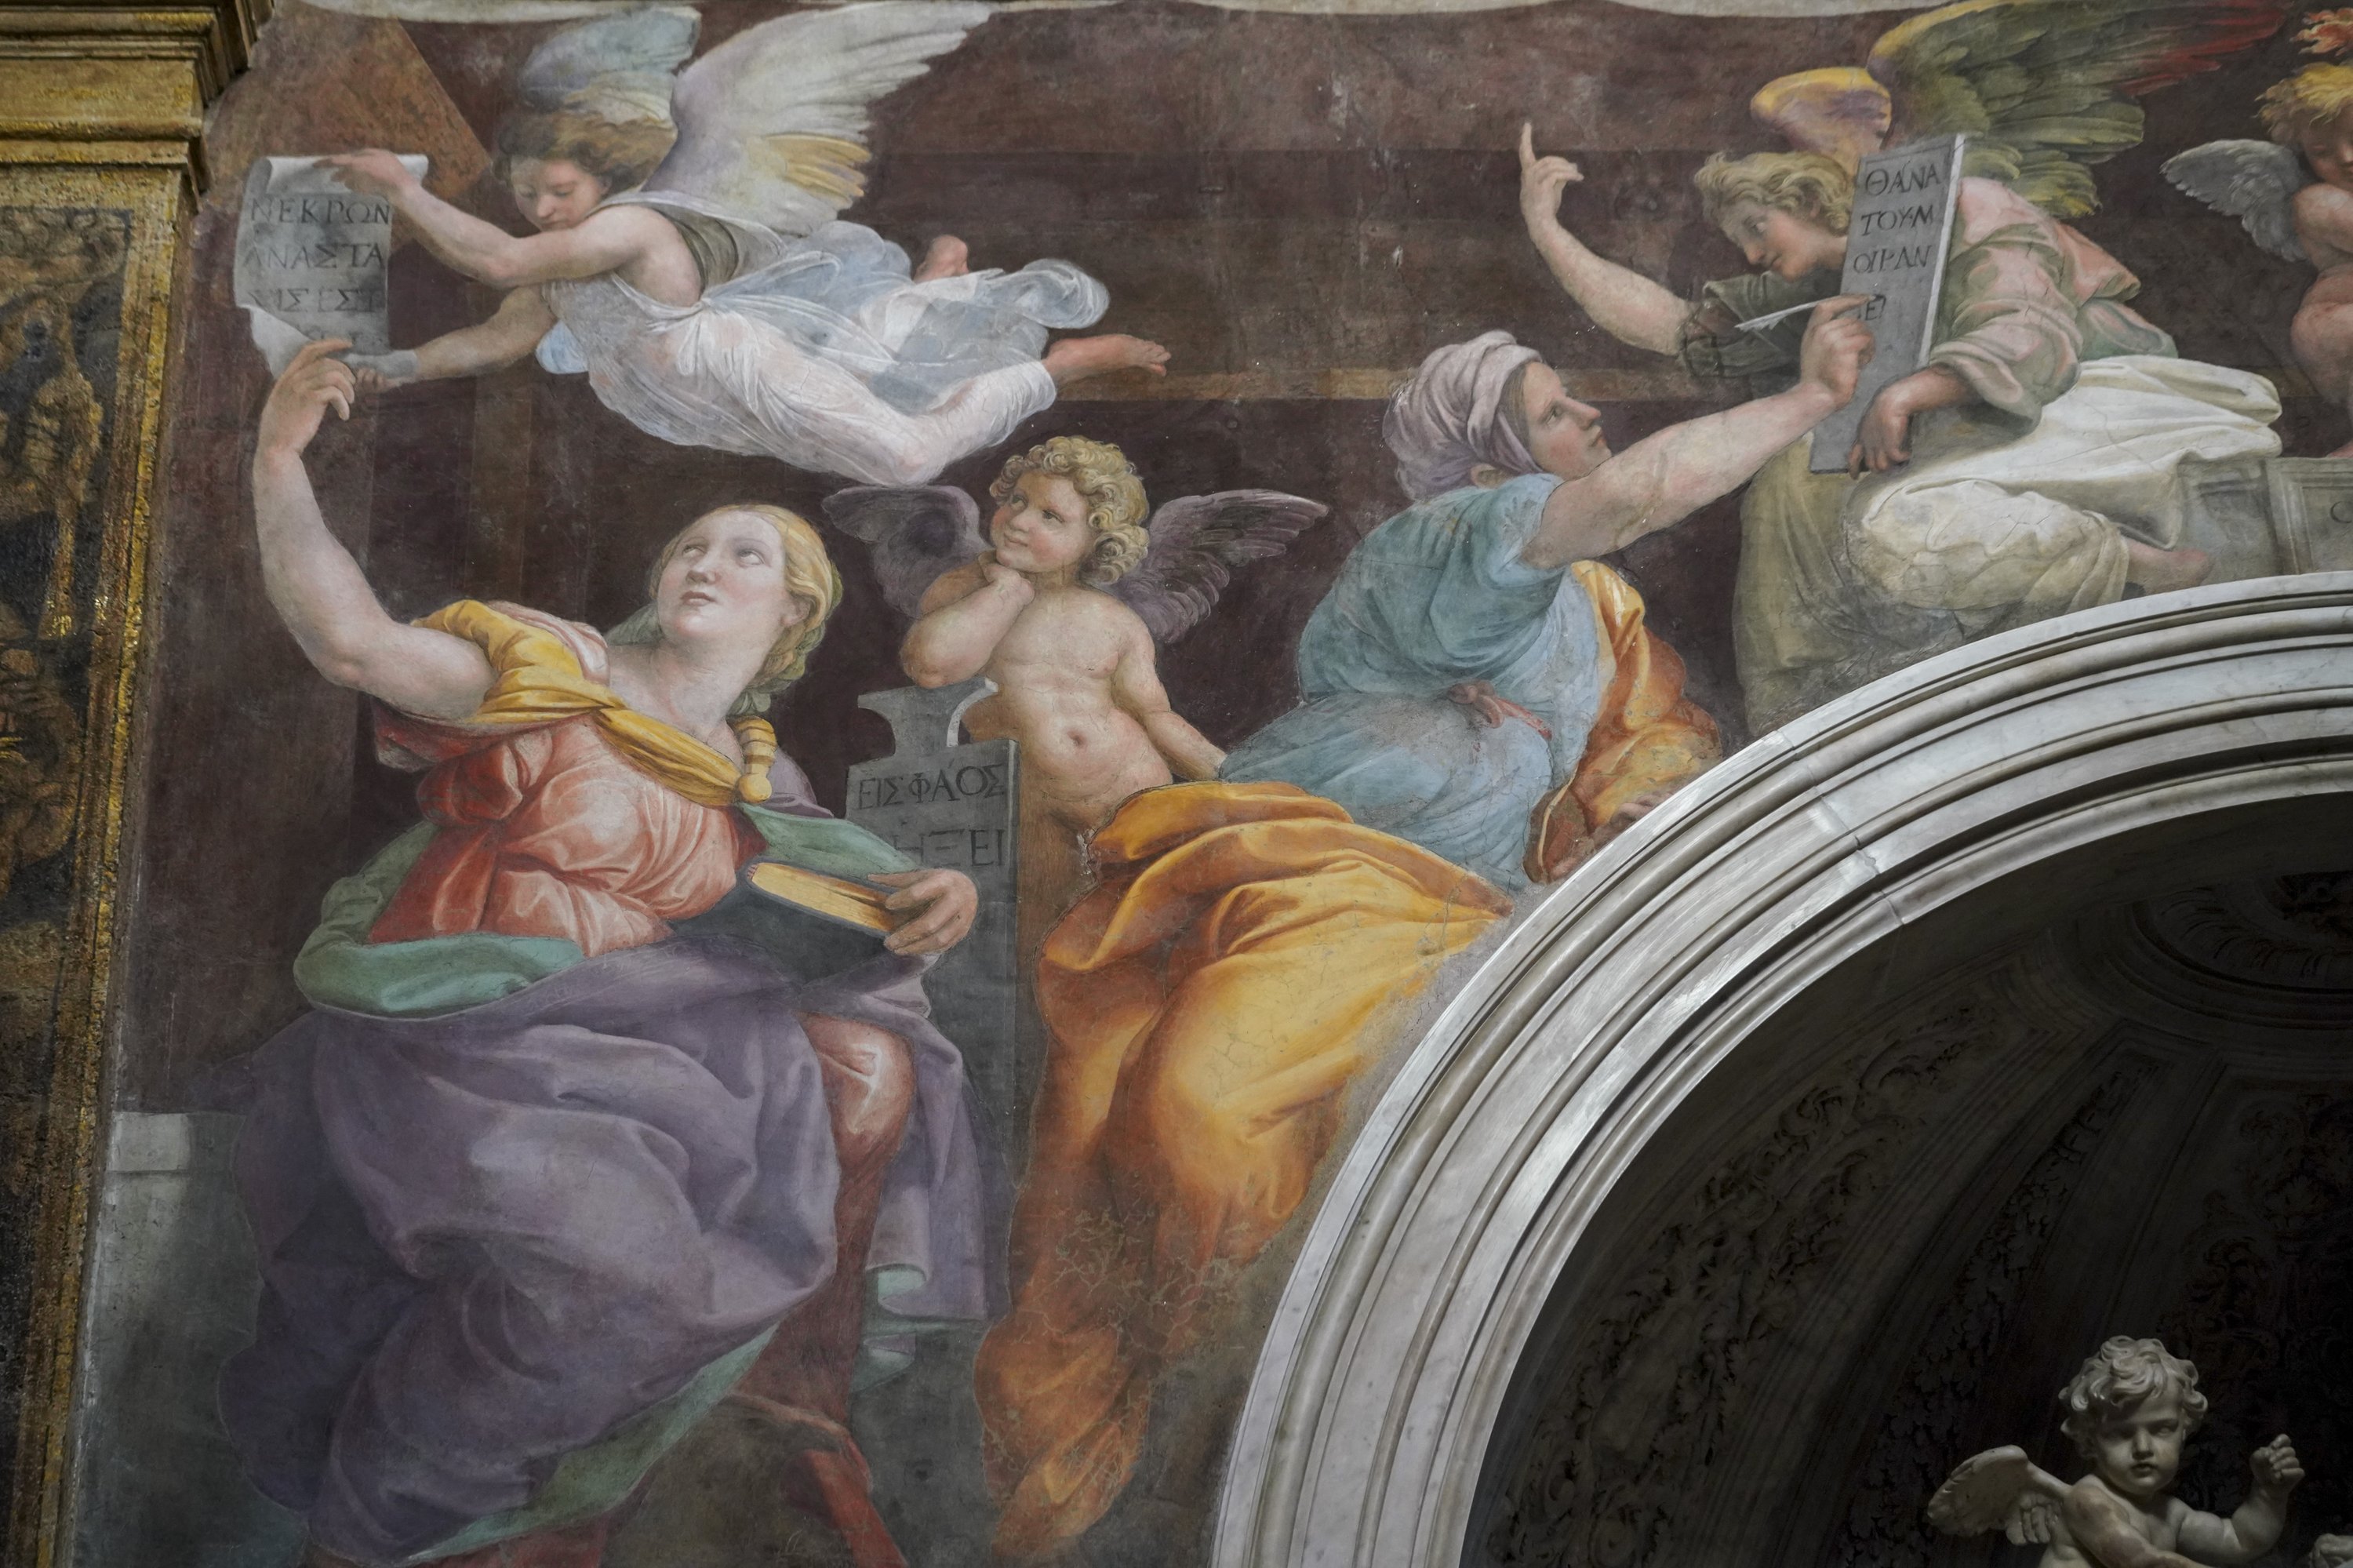 Churches in Rome beckon with art and no ‘hordes’